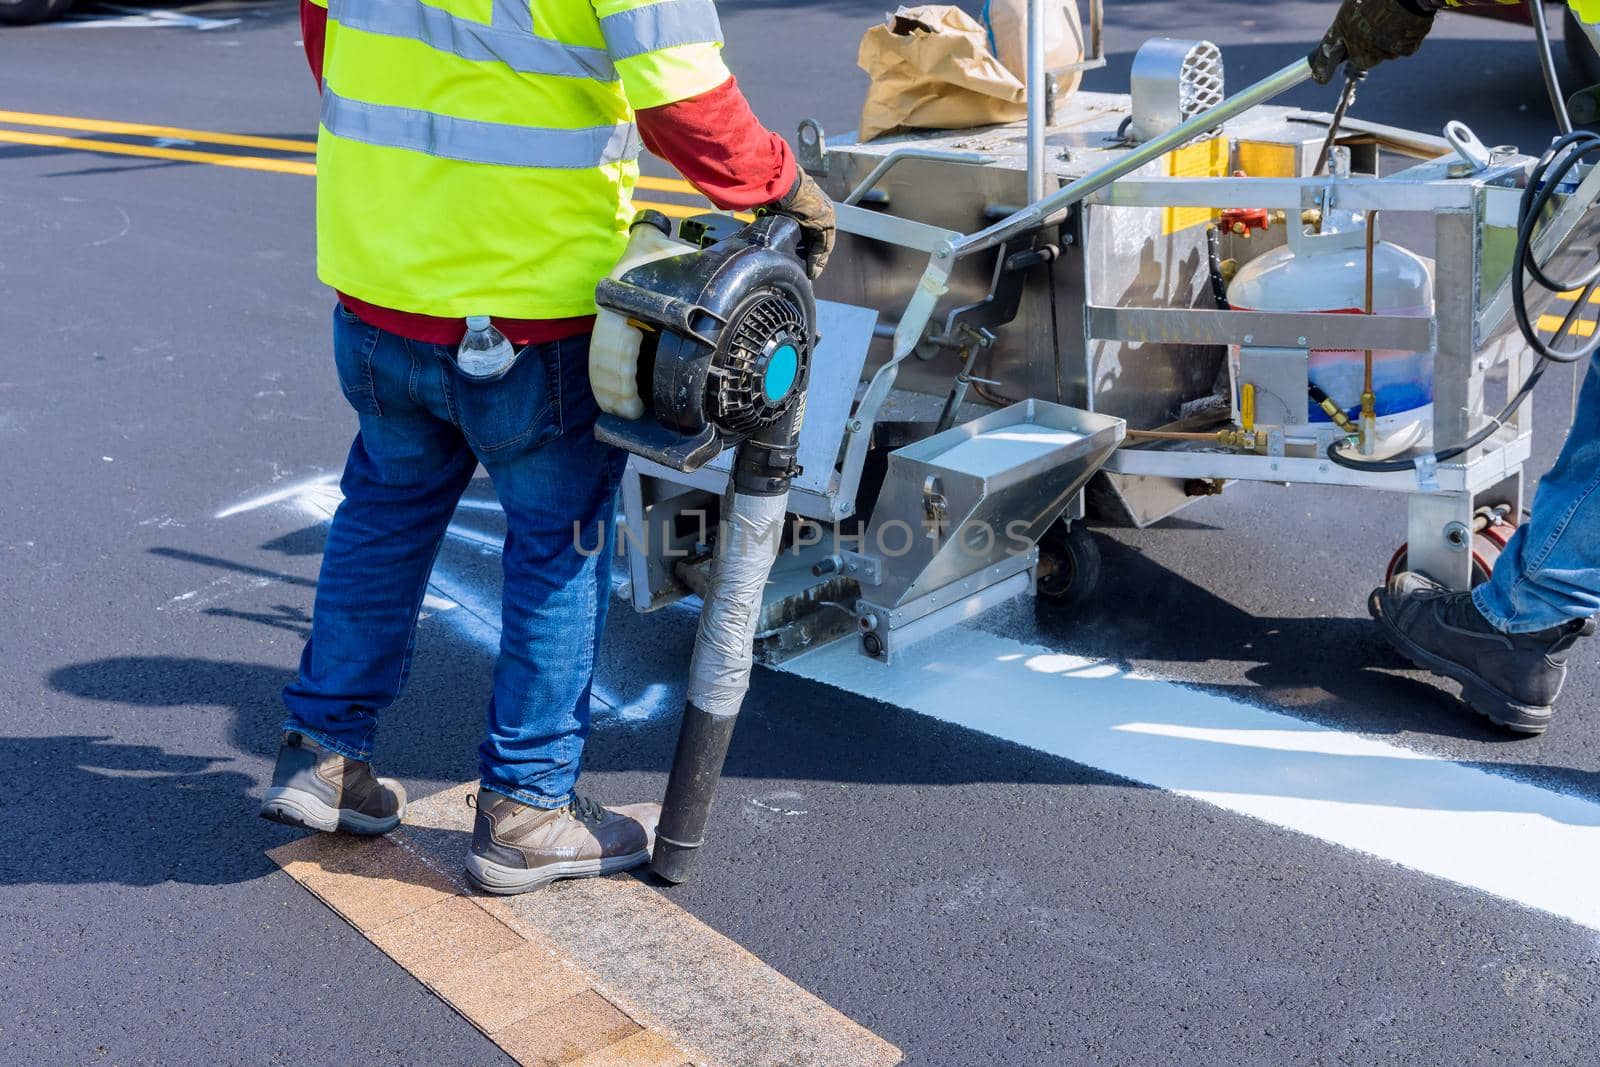 Road construction worker painting white line on the street surface tor thermoplastic spray marking machine during road construction